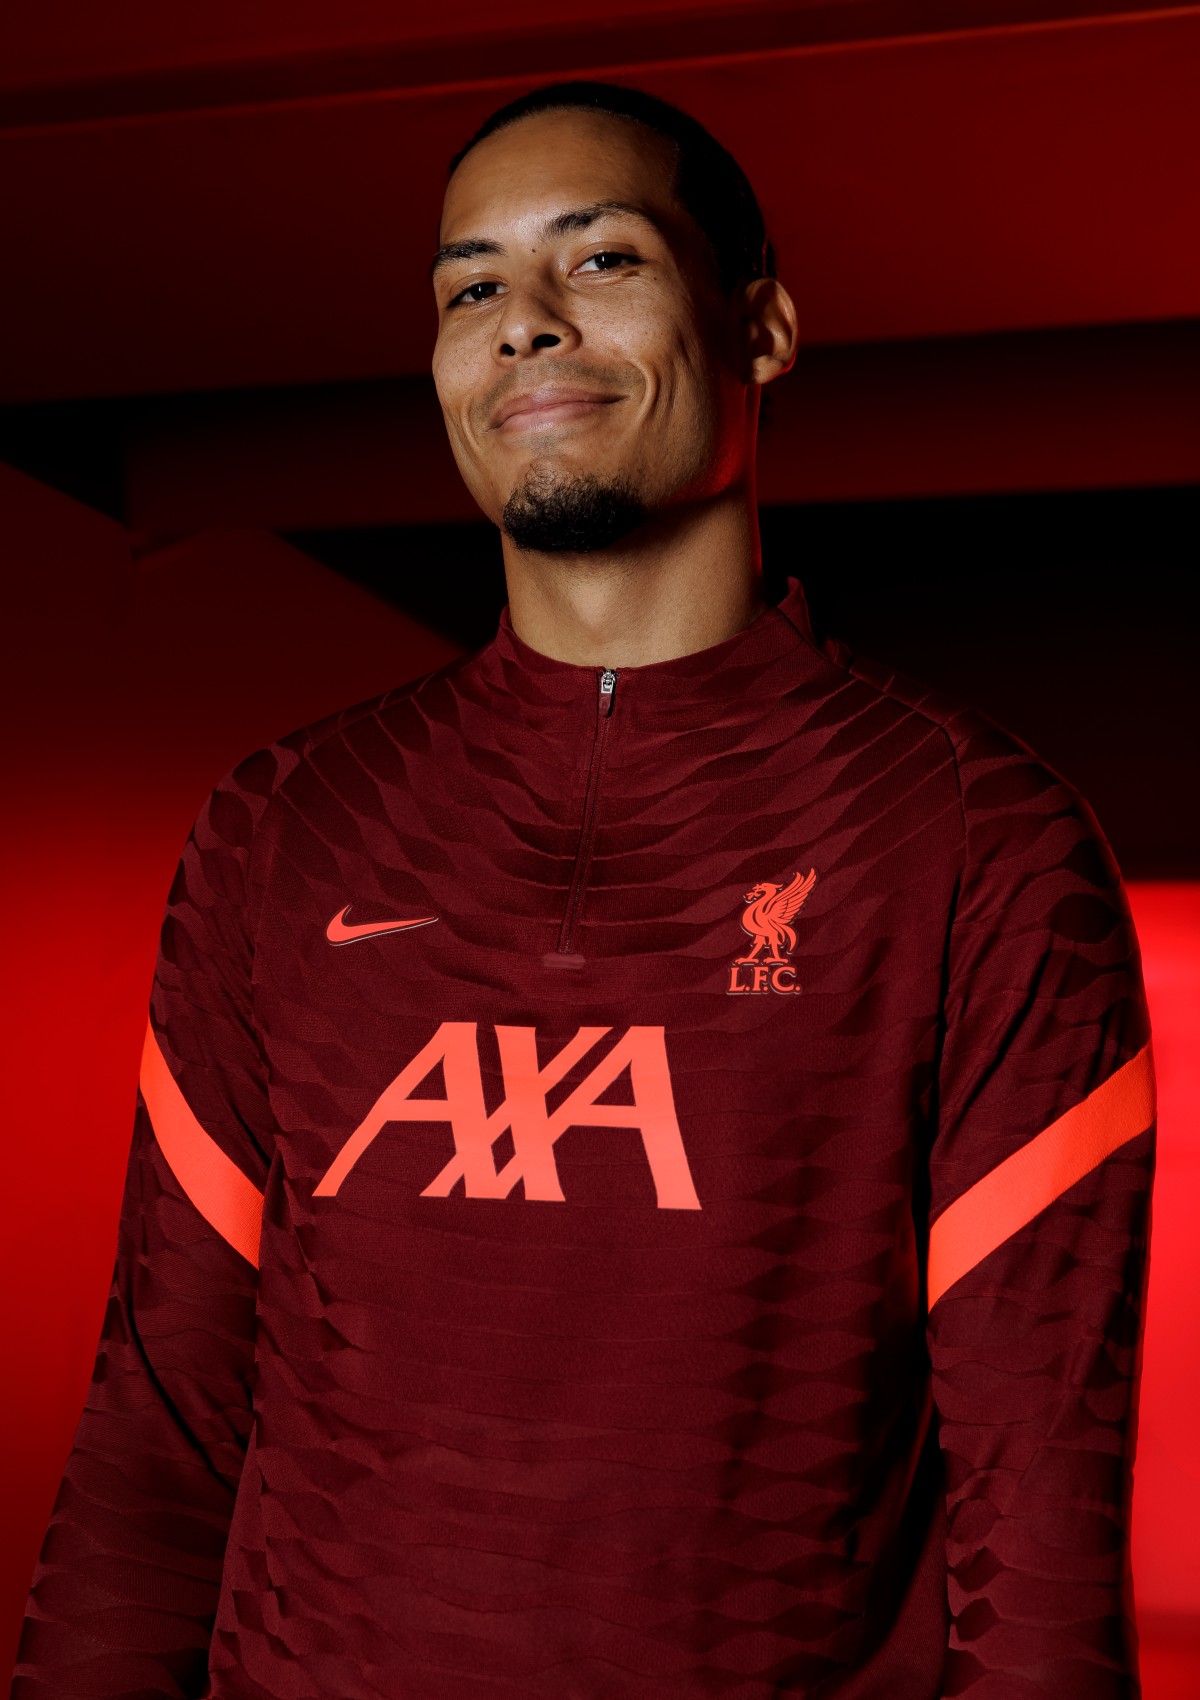 Kruiden Zwerver Mark Out now: Liverpool's new 2021-22 Nike home kit - Liverpool FC